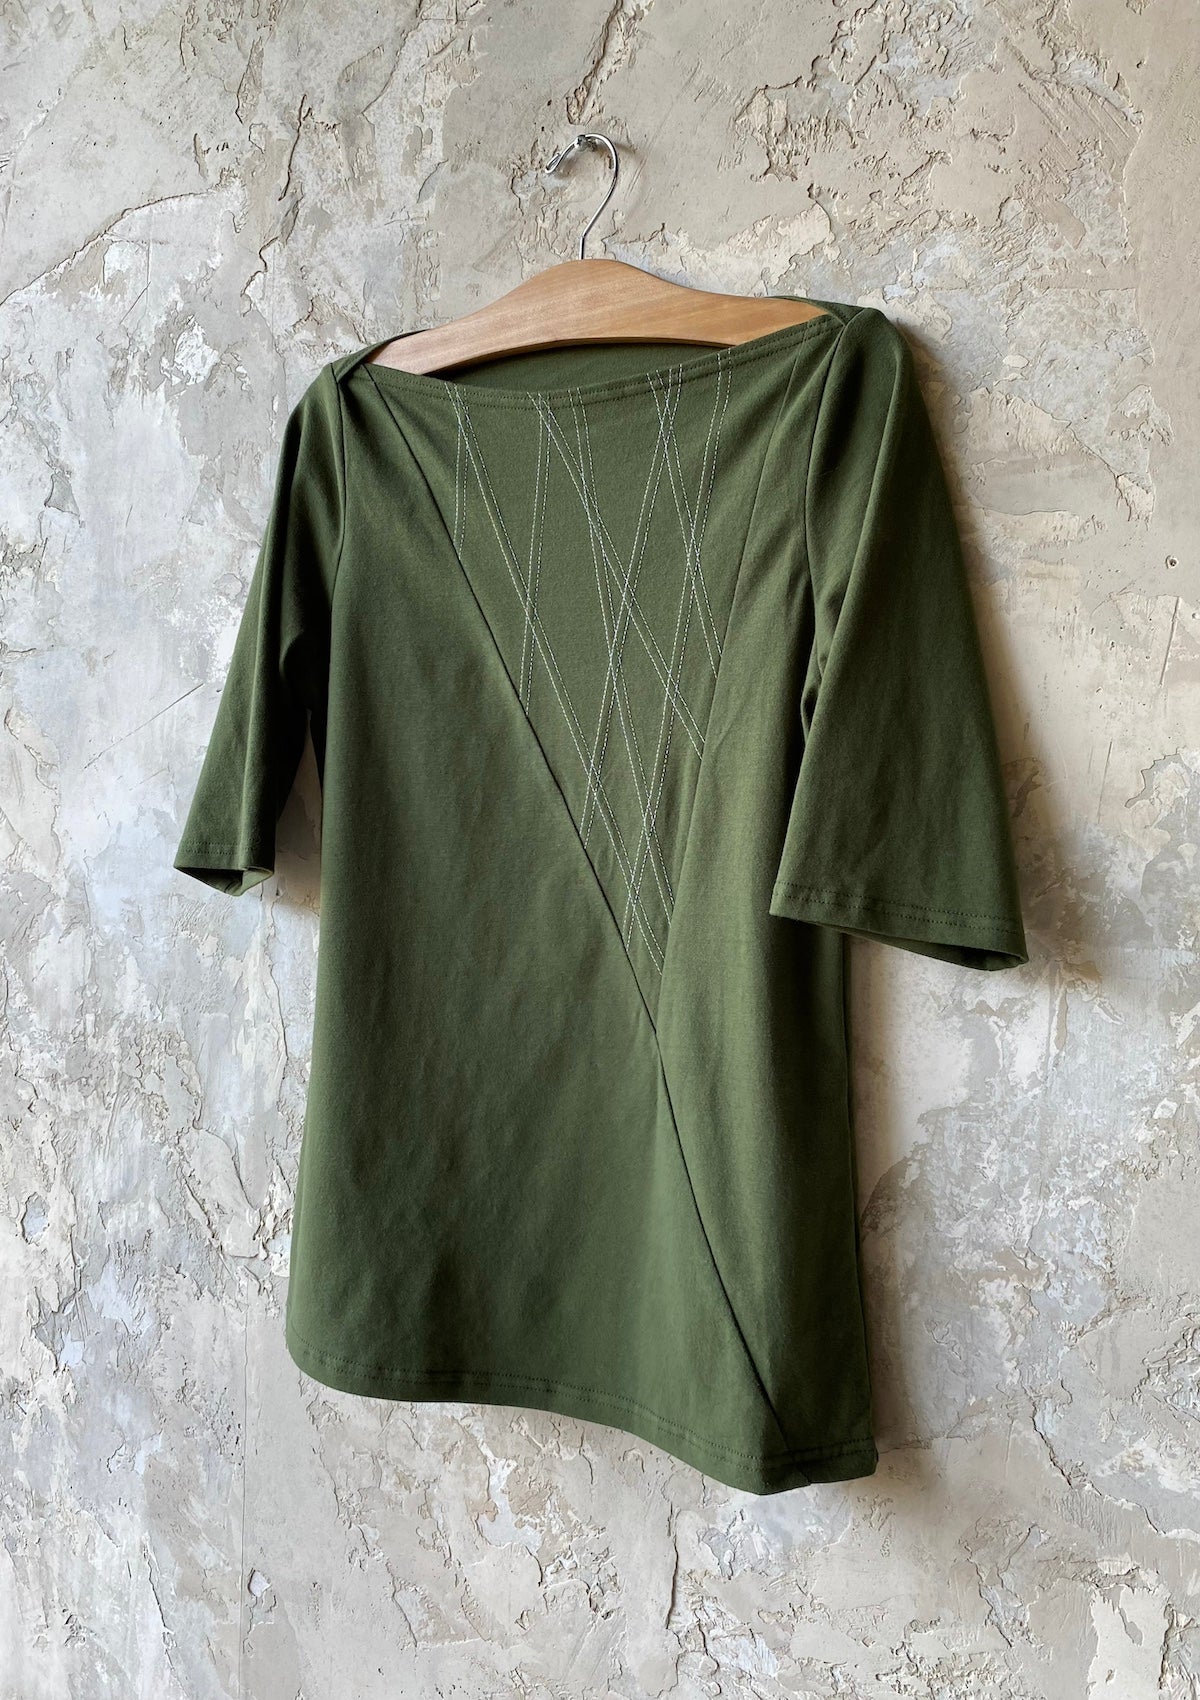 Medium, Triangle Top Mid Sleeve in olive